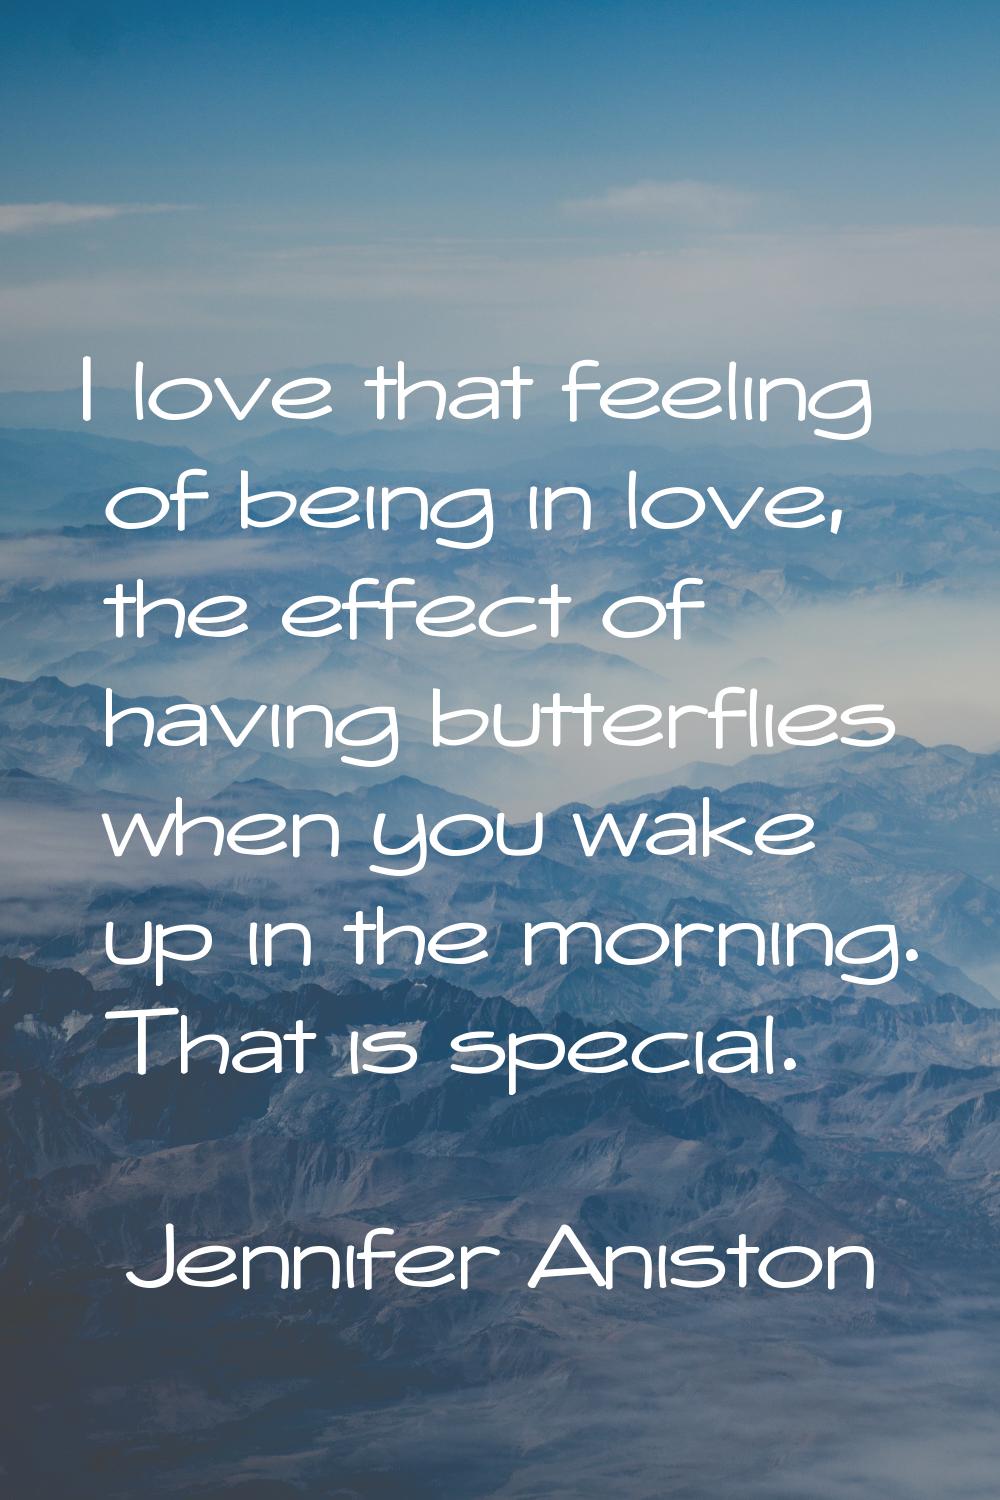 I love that feeling of being in love, the effect of having butterflies when you wake up in the morn